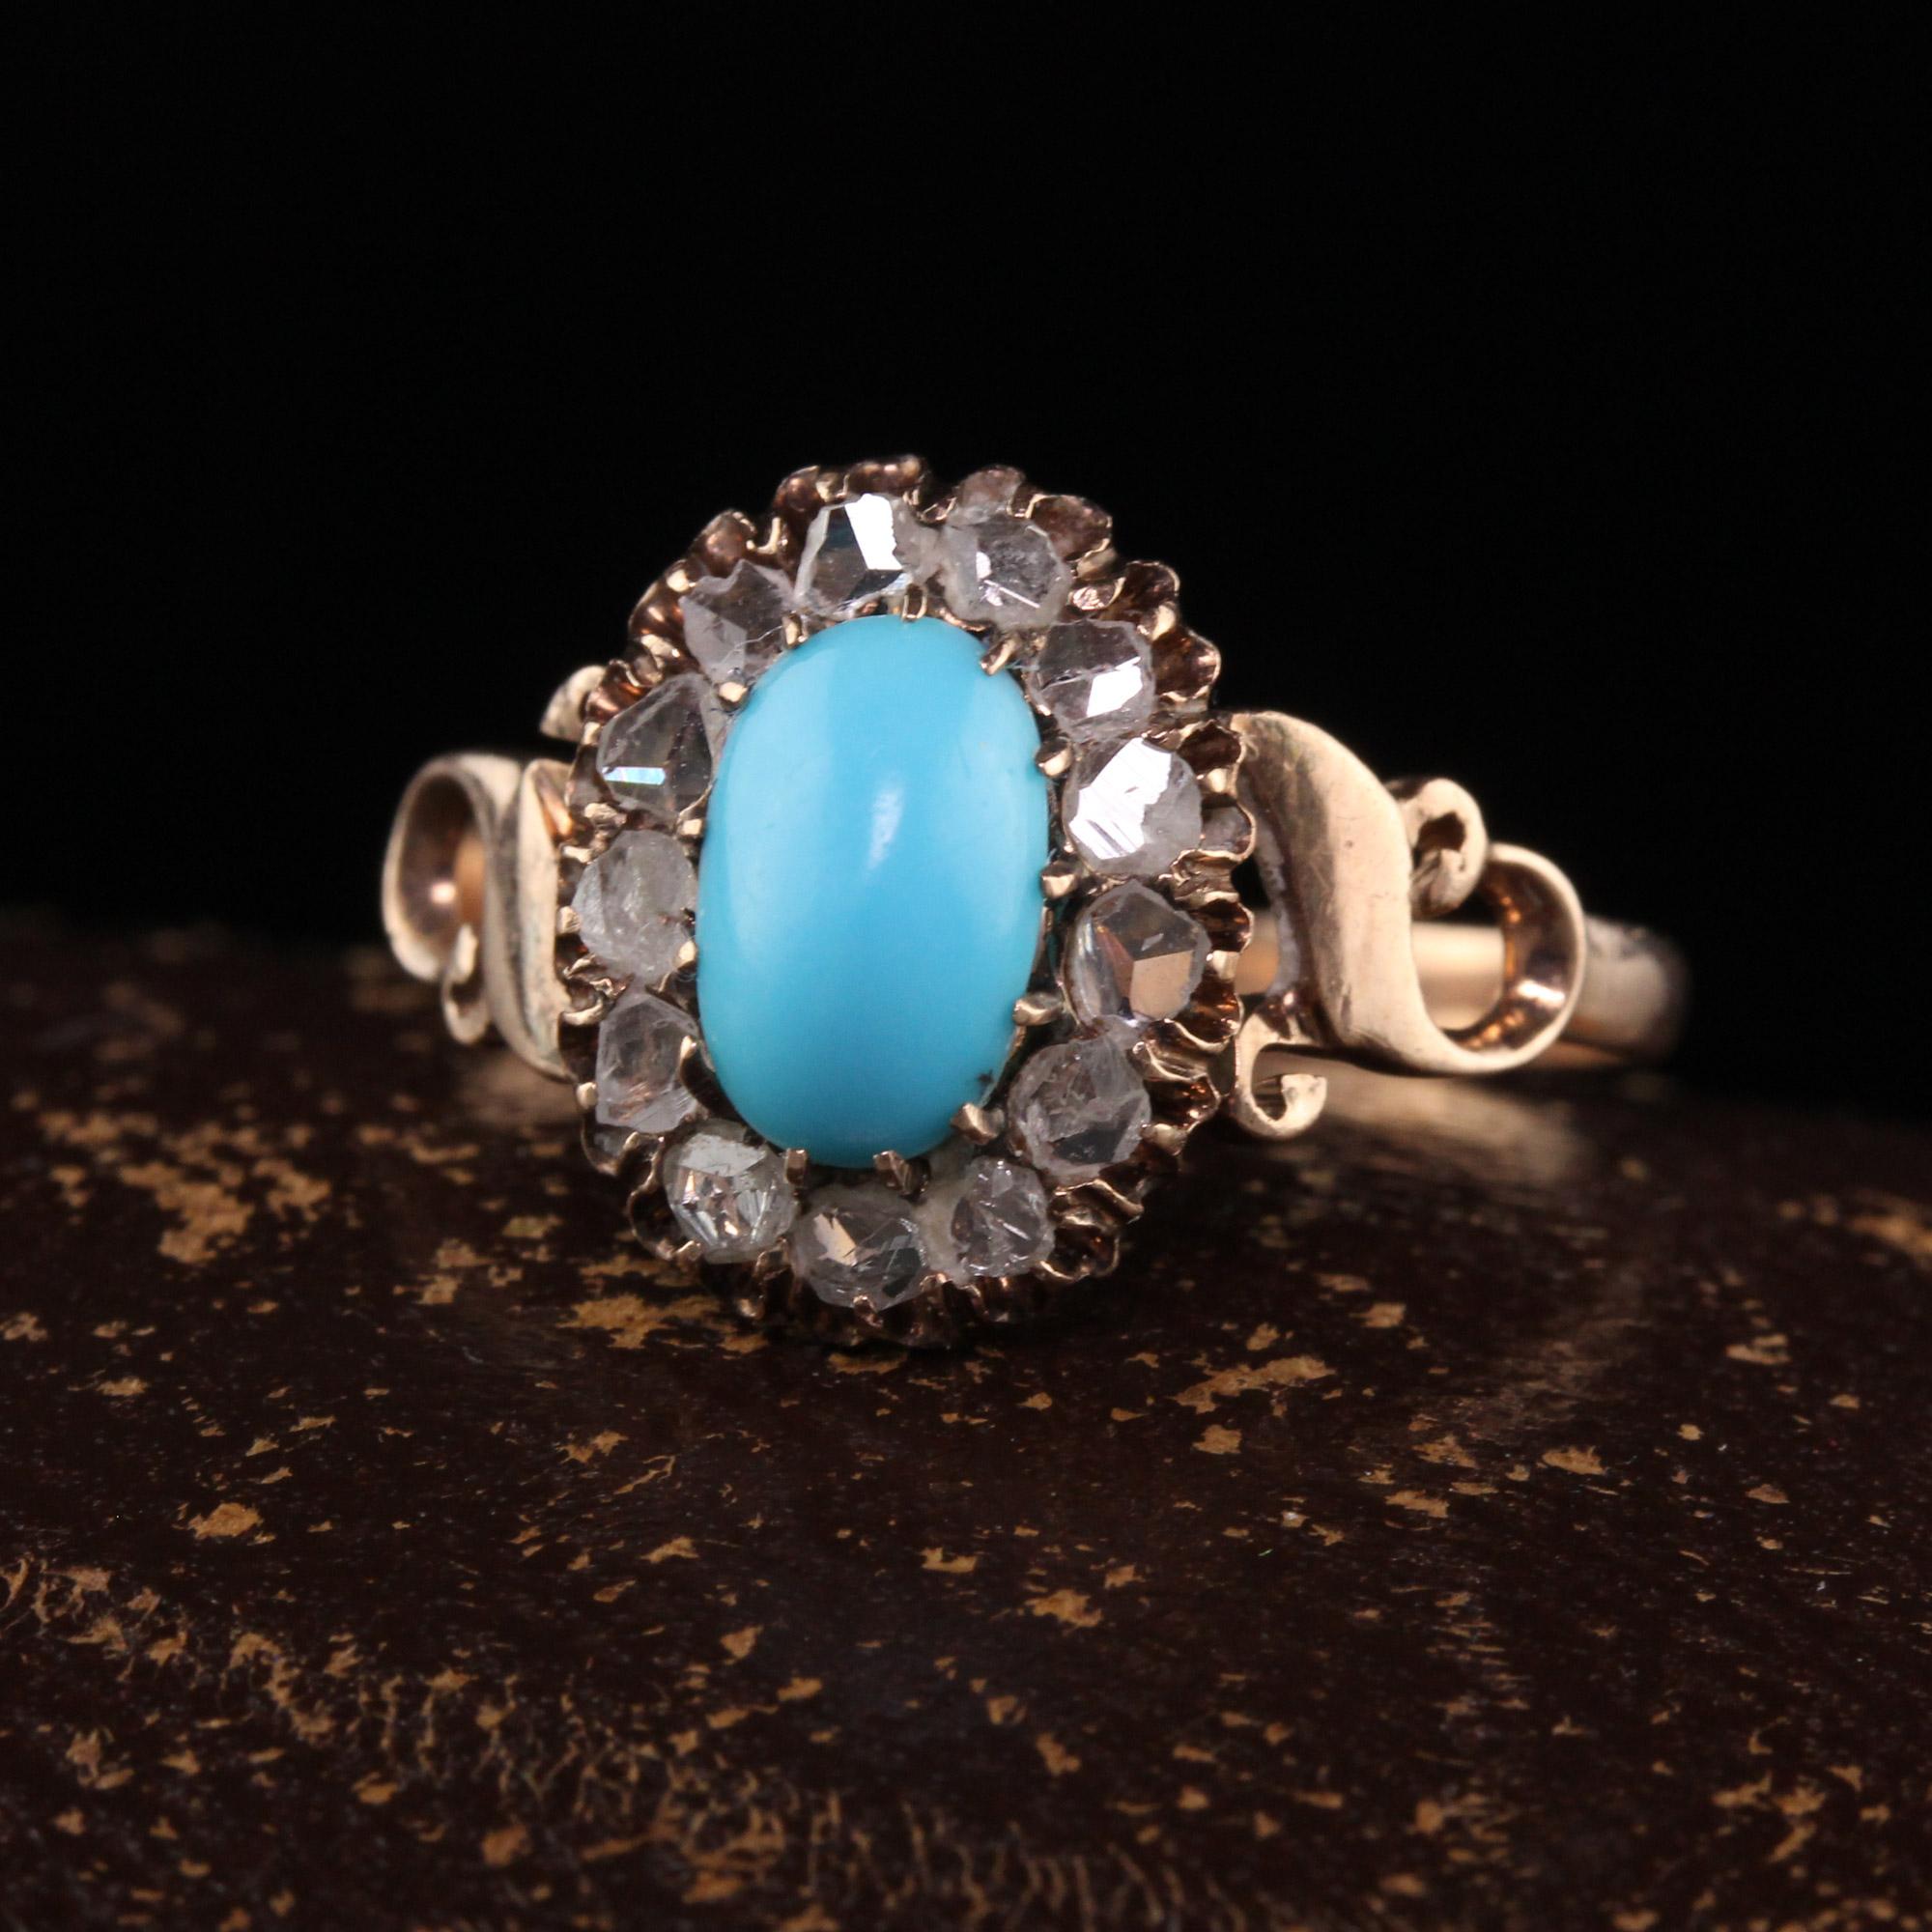 Beautiful Antique Victorian 14K Yellow Gold Turquoise and Rose Cut Diamond Engagement Ring. This ring is crafted in 14k yellow gold. The center is a cabochon turquoise and is surrounded by hand cut rose cut diamonds in a 14k yellow gold